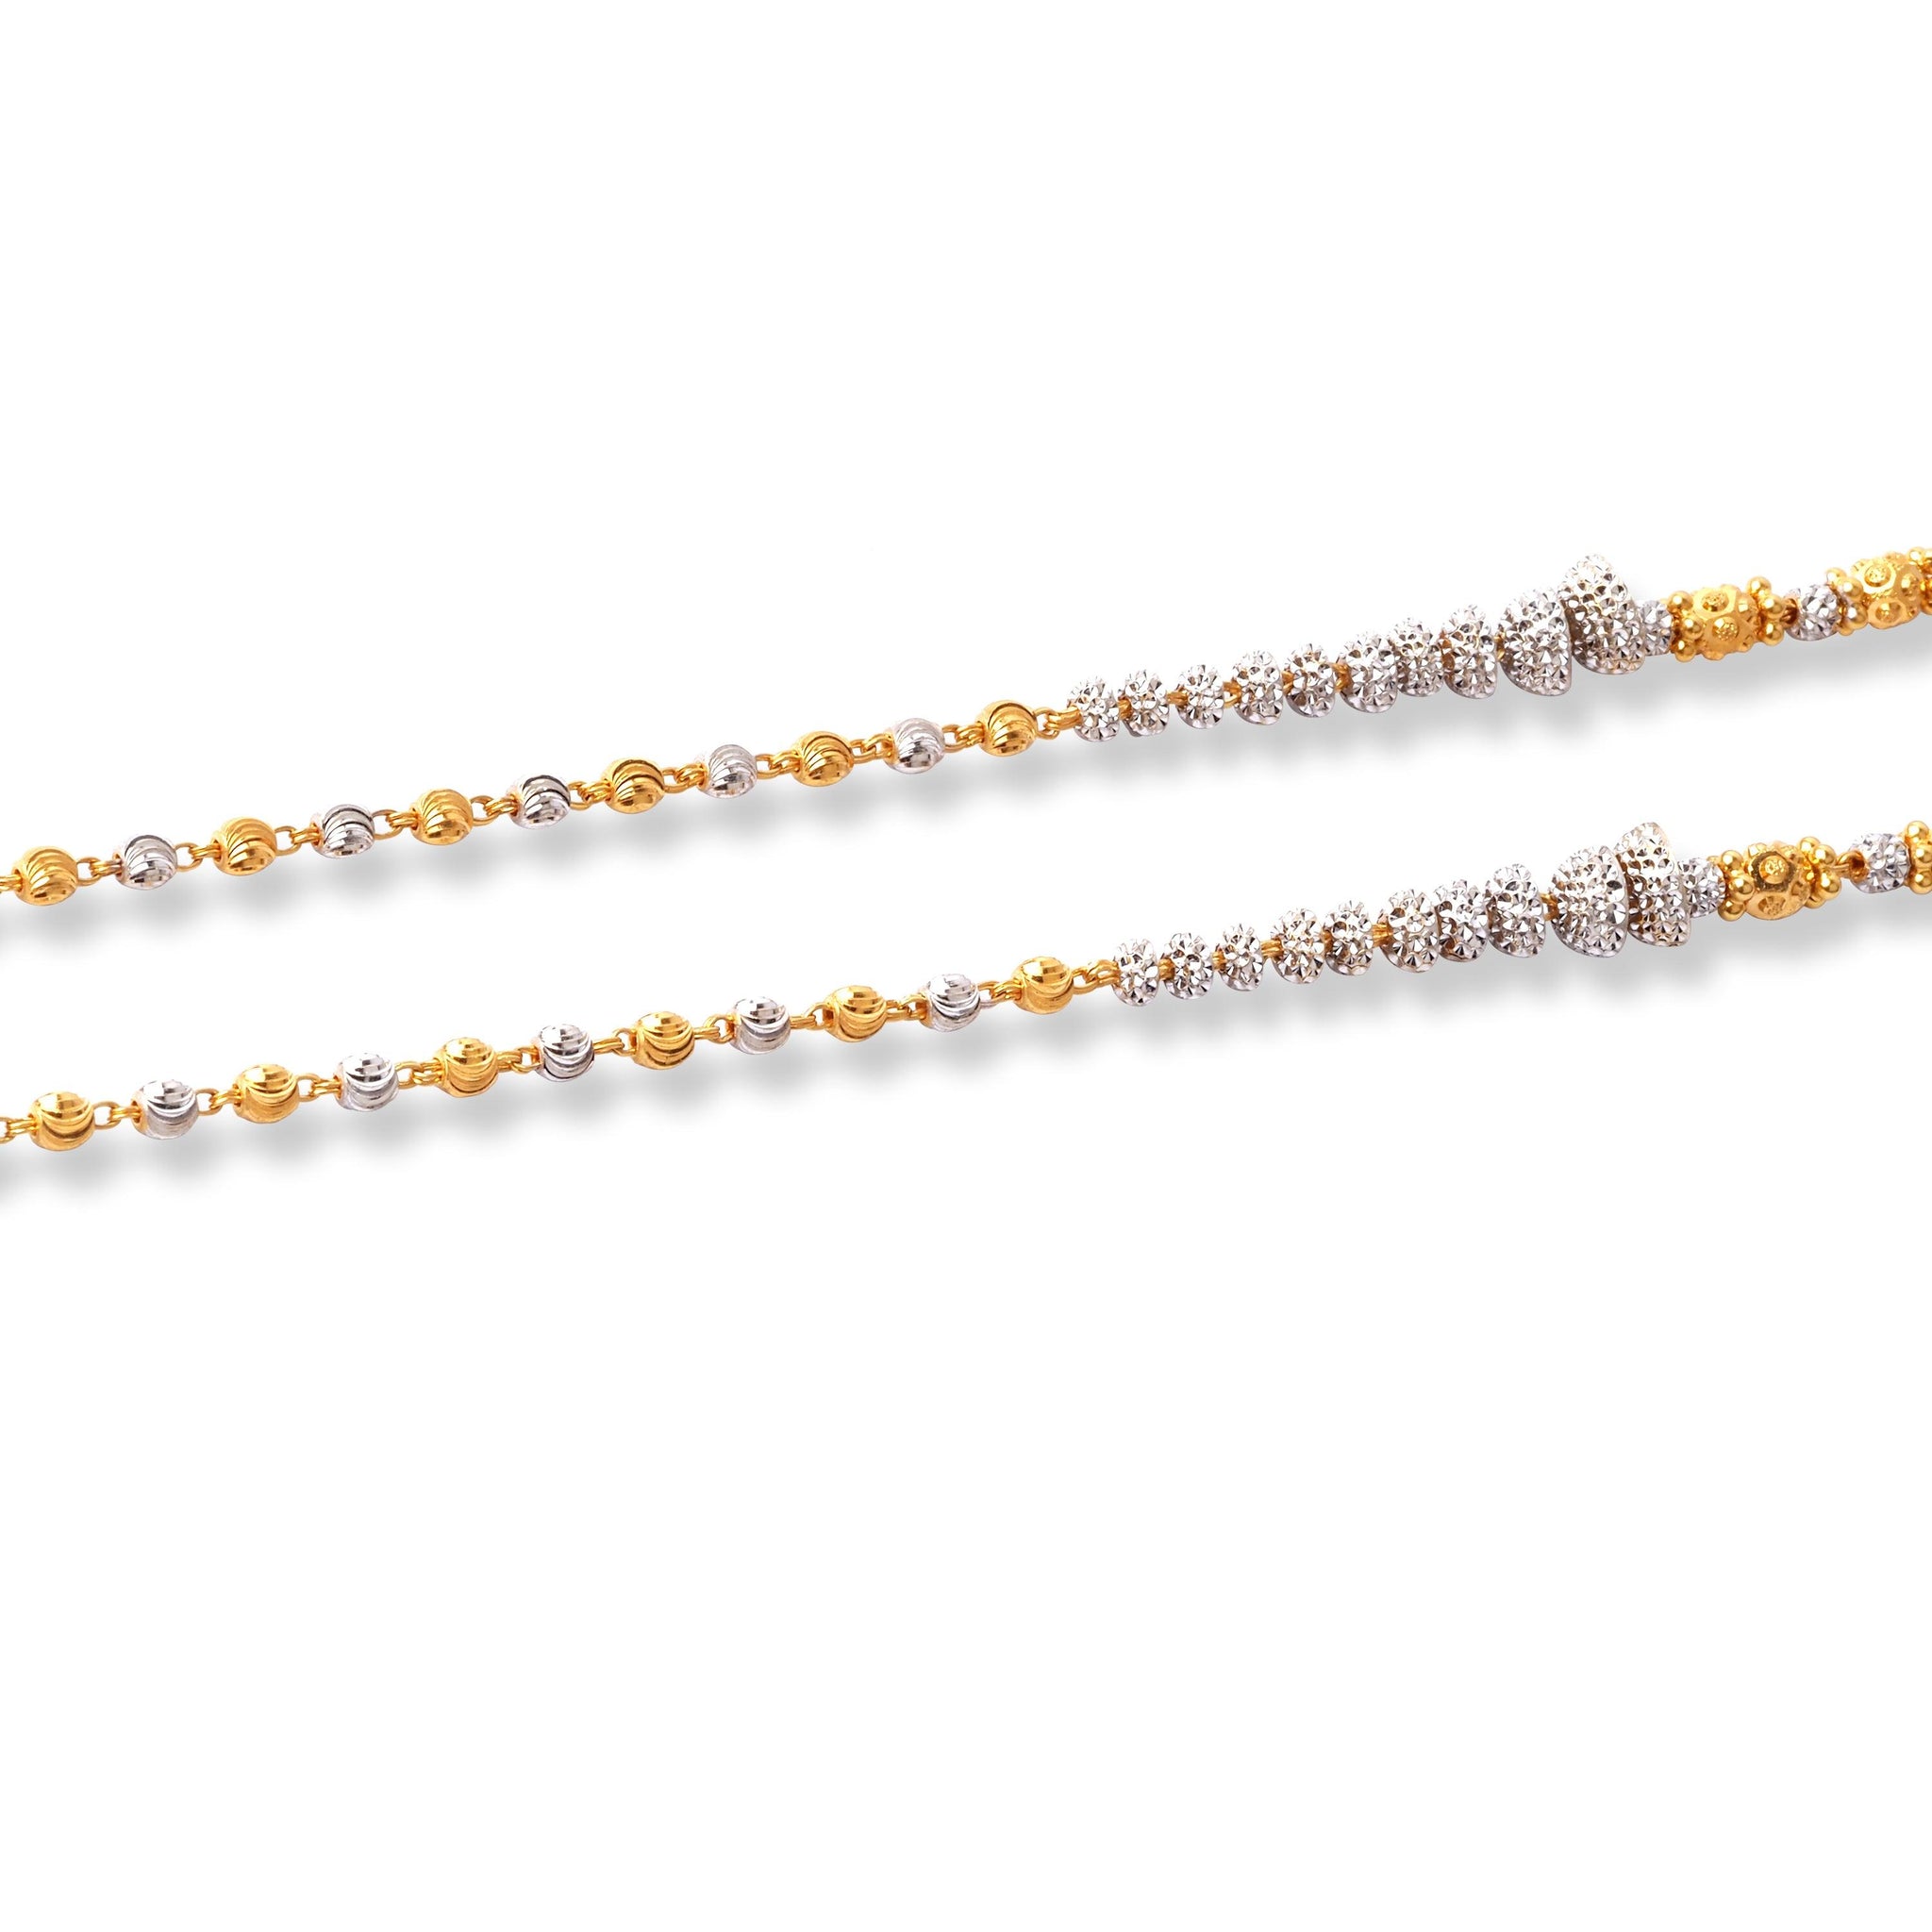 22ct Yellow Gold Long Beaded Necklaces with Rhodium Design (24g) N-6582